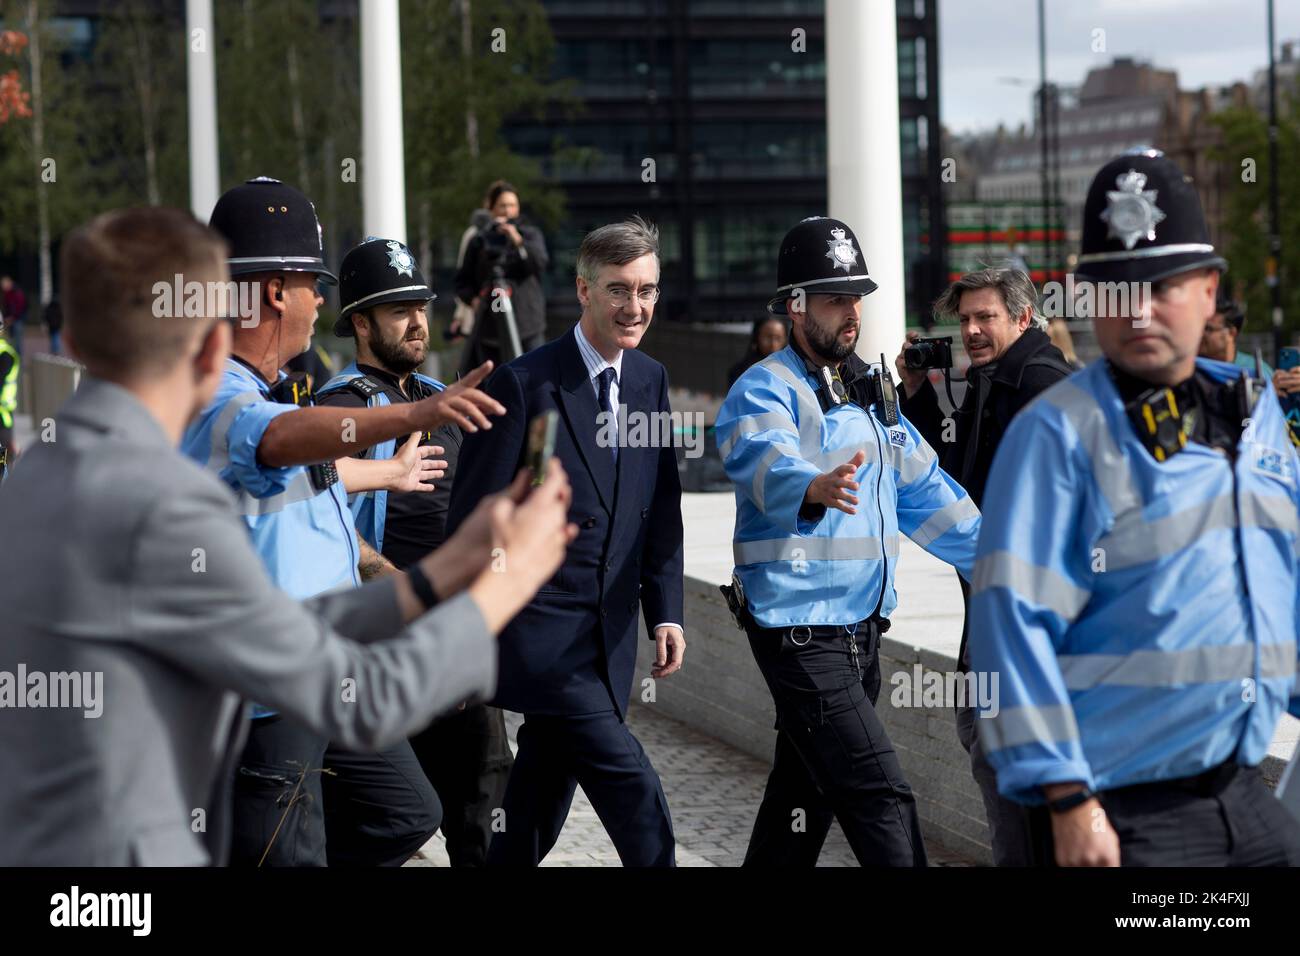 Jacob Rees-Mogg arriving at the Conservative Party Conference in Birmingham Stock Photo